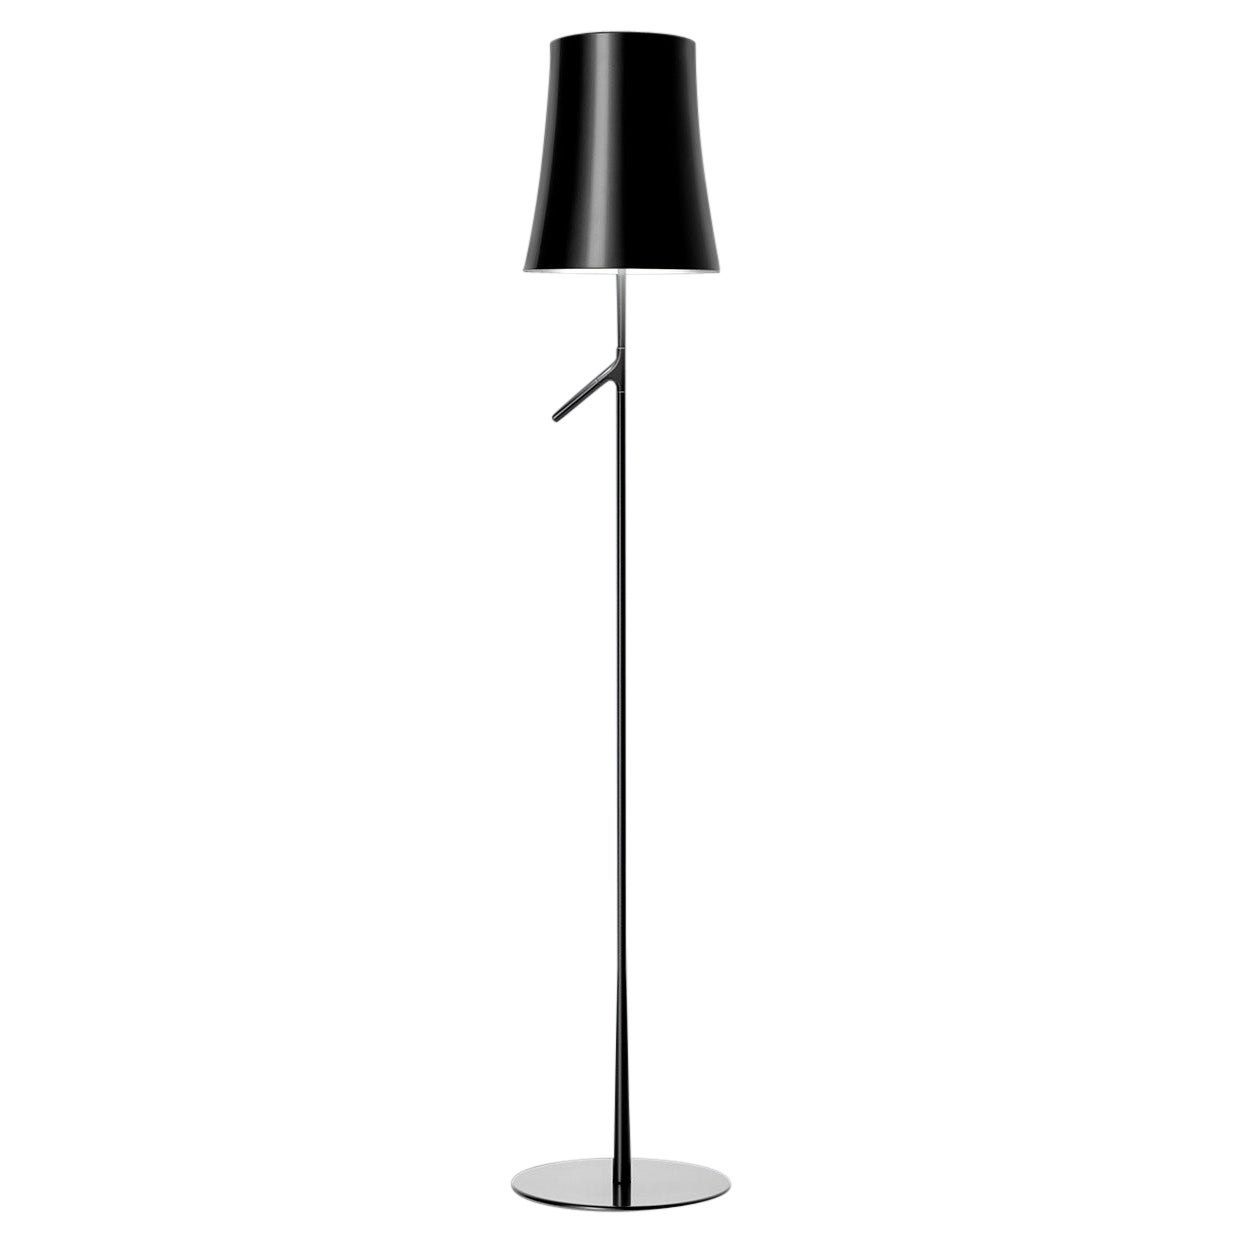 Foscarini Dimmable Birdie Floor Lamp in Graphite by Ludovica & Roberto Palomba For Sale